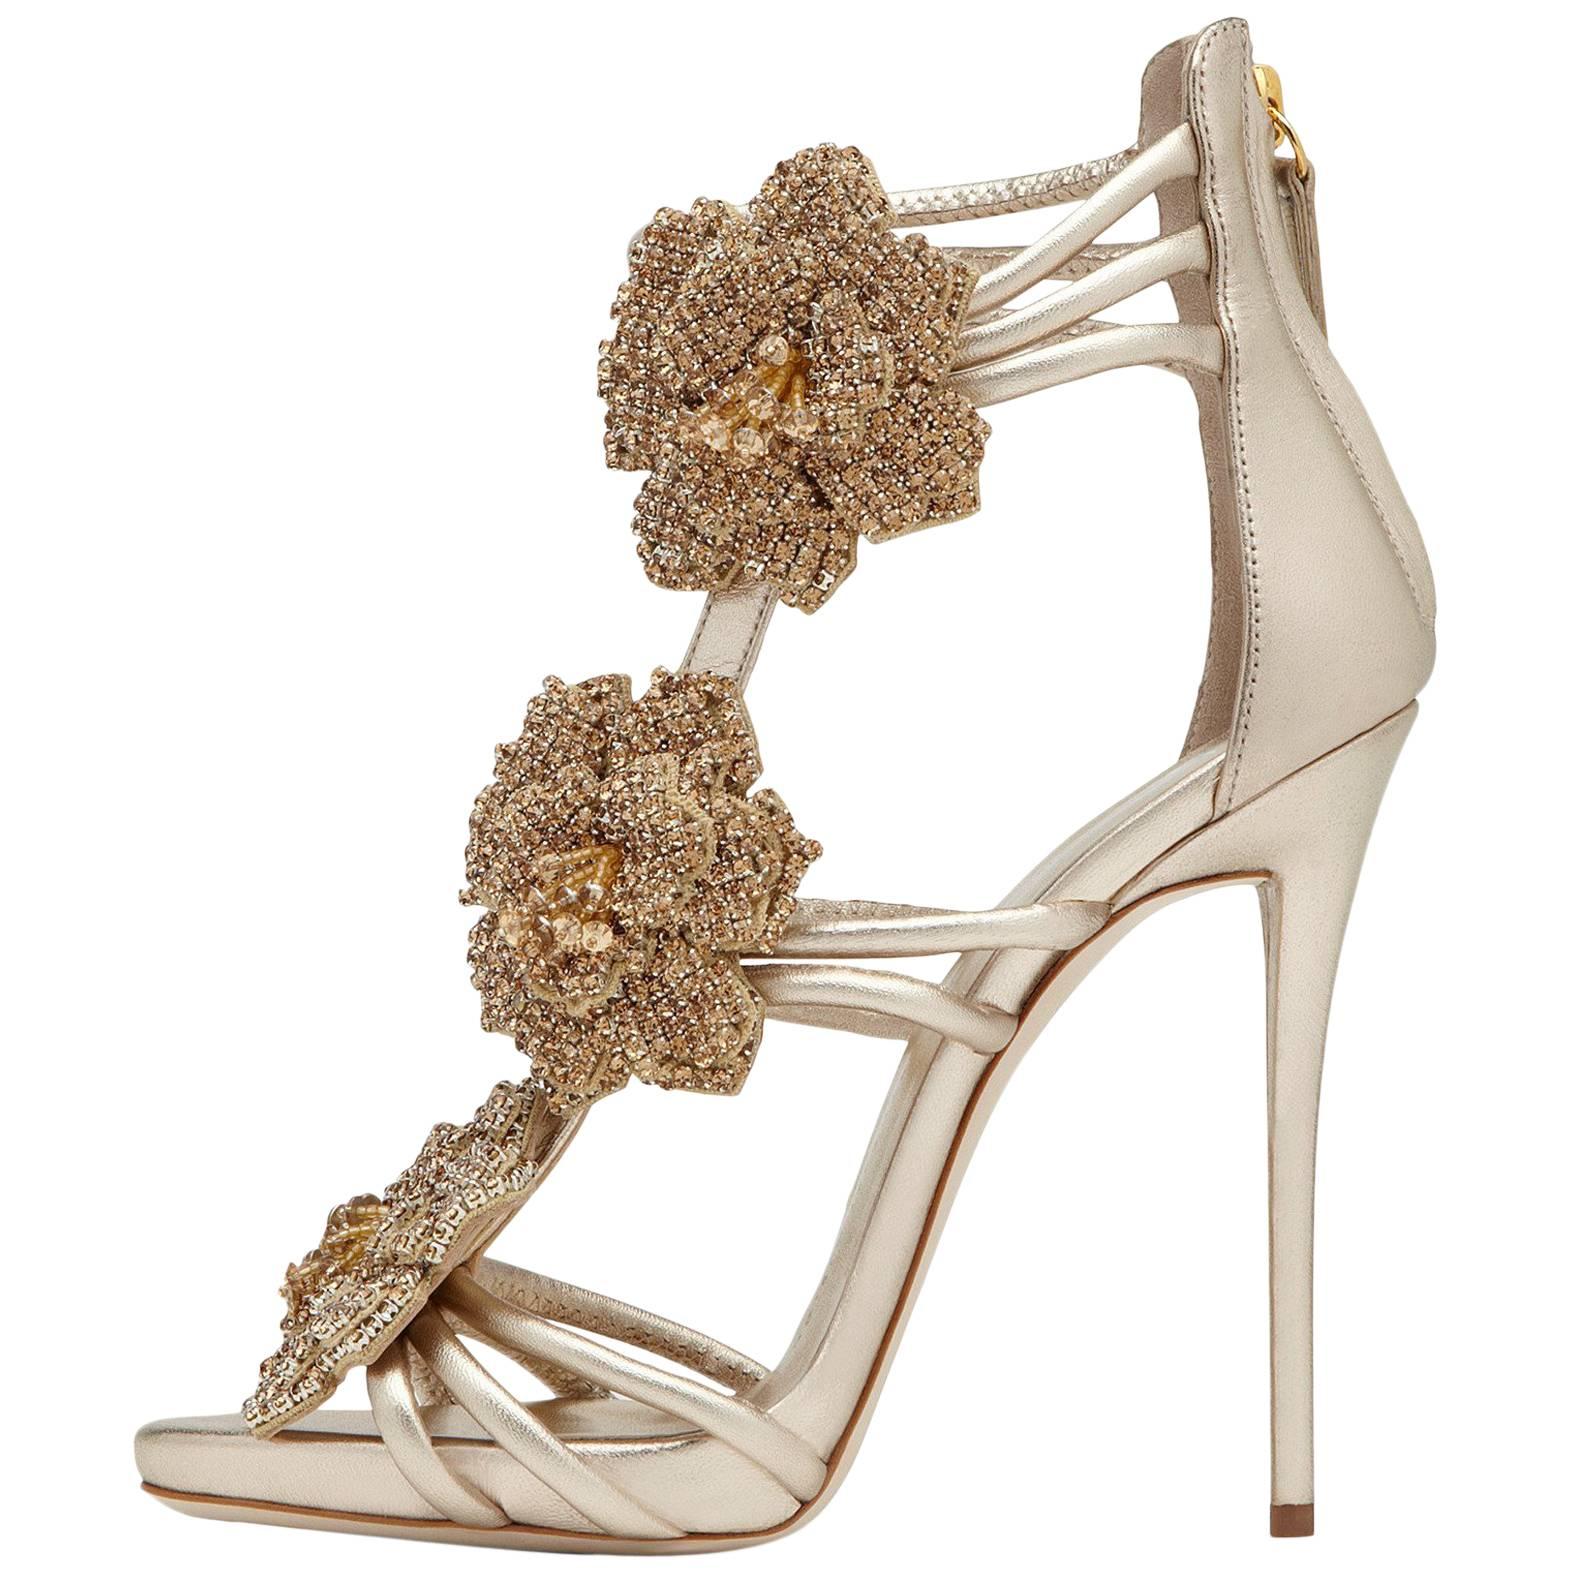 Giuseppe Zanotti New Gold Leather Crystal Rose Evening Sandals Heels in Box